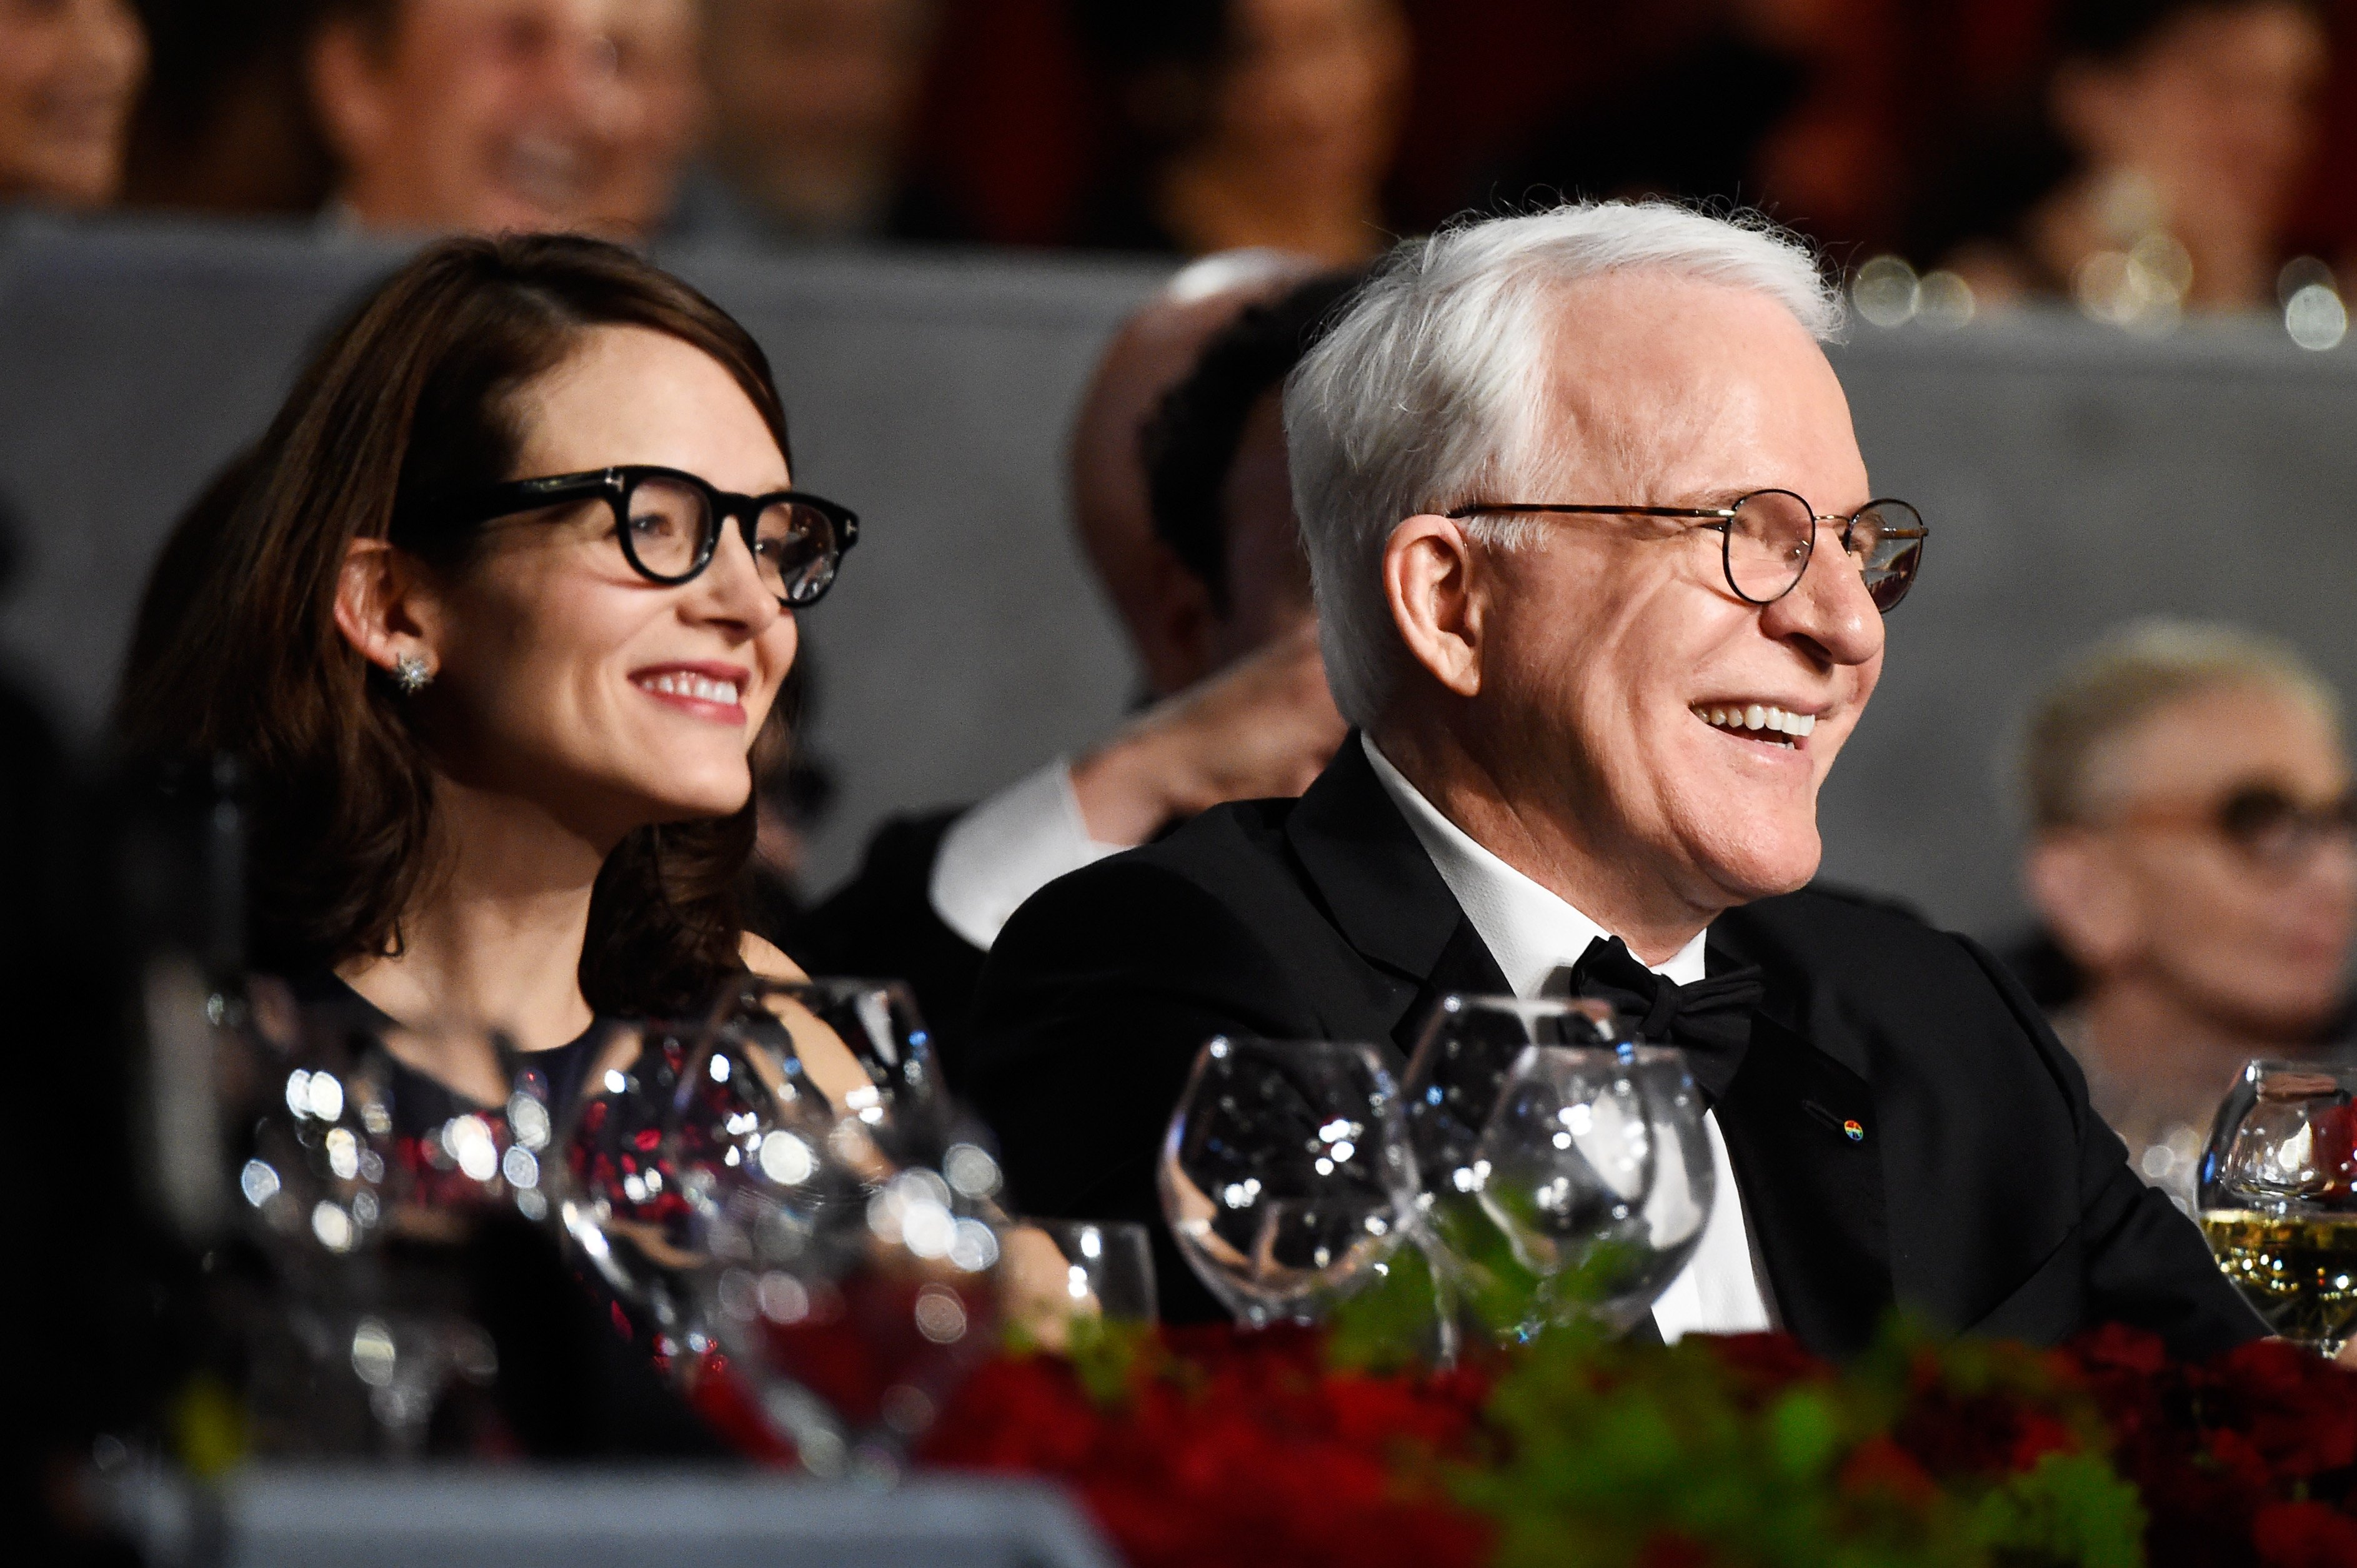 Anne Stringfield and Steve Martin at the AFI Life Achievement Award Gala Tribute Honoring the comedian on June 4, 2015, in Hollywood, California | Source: Getty Images